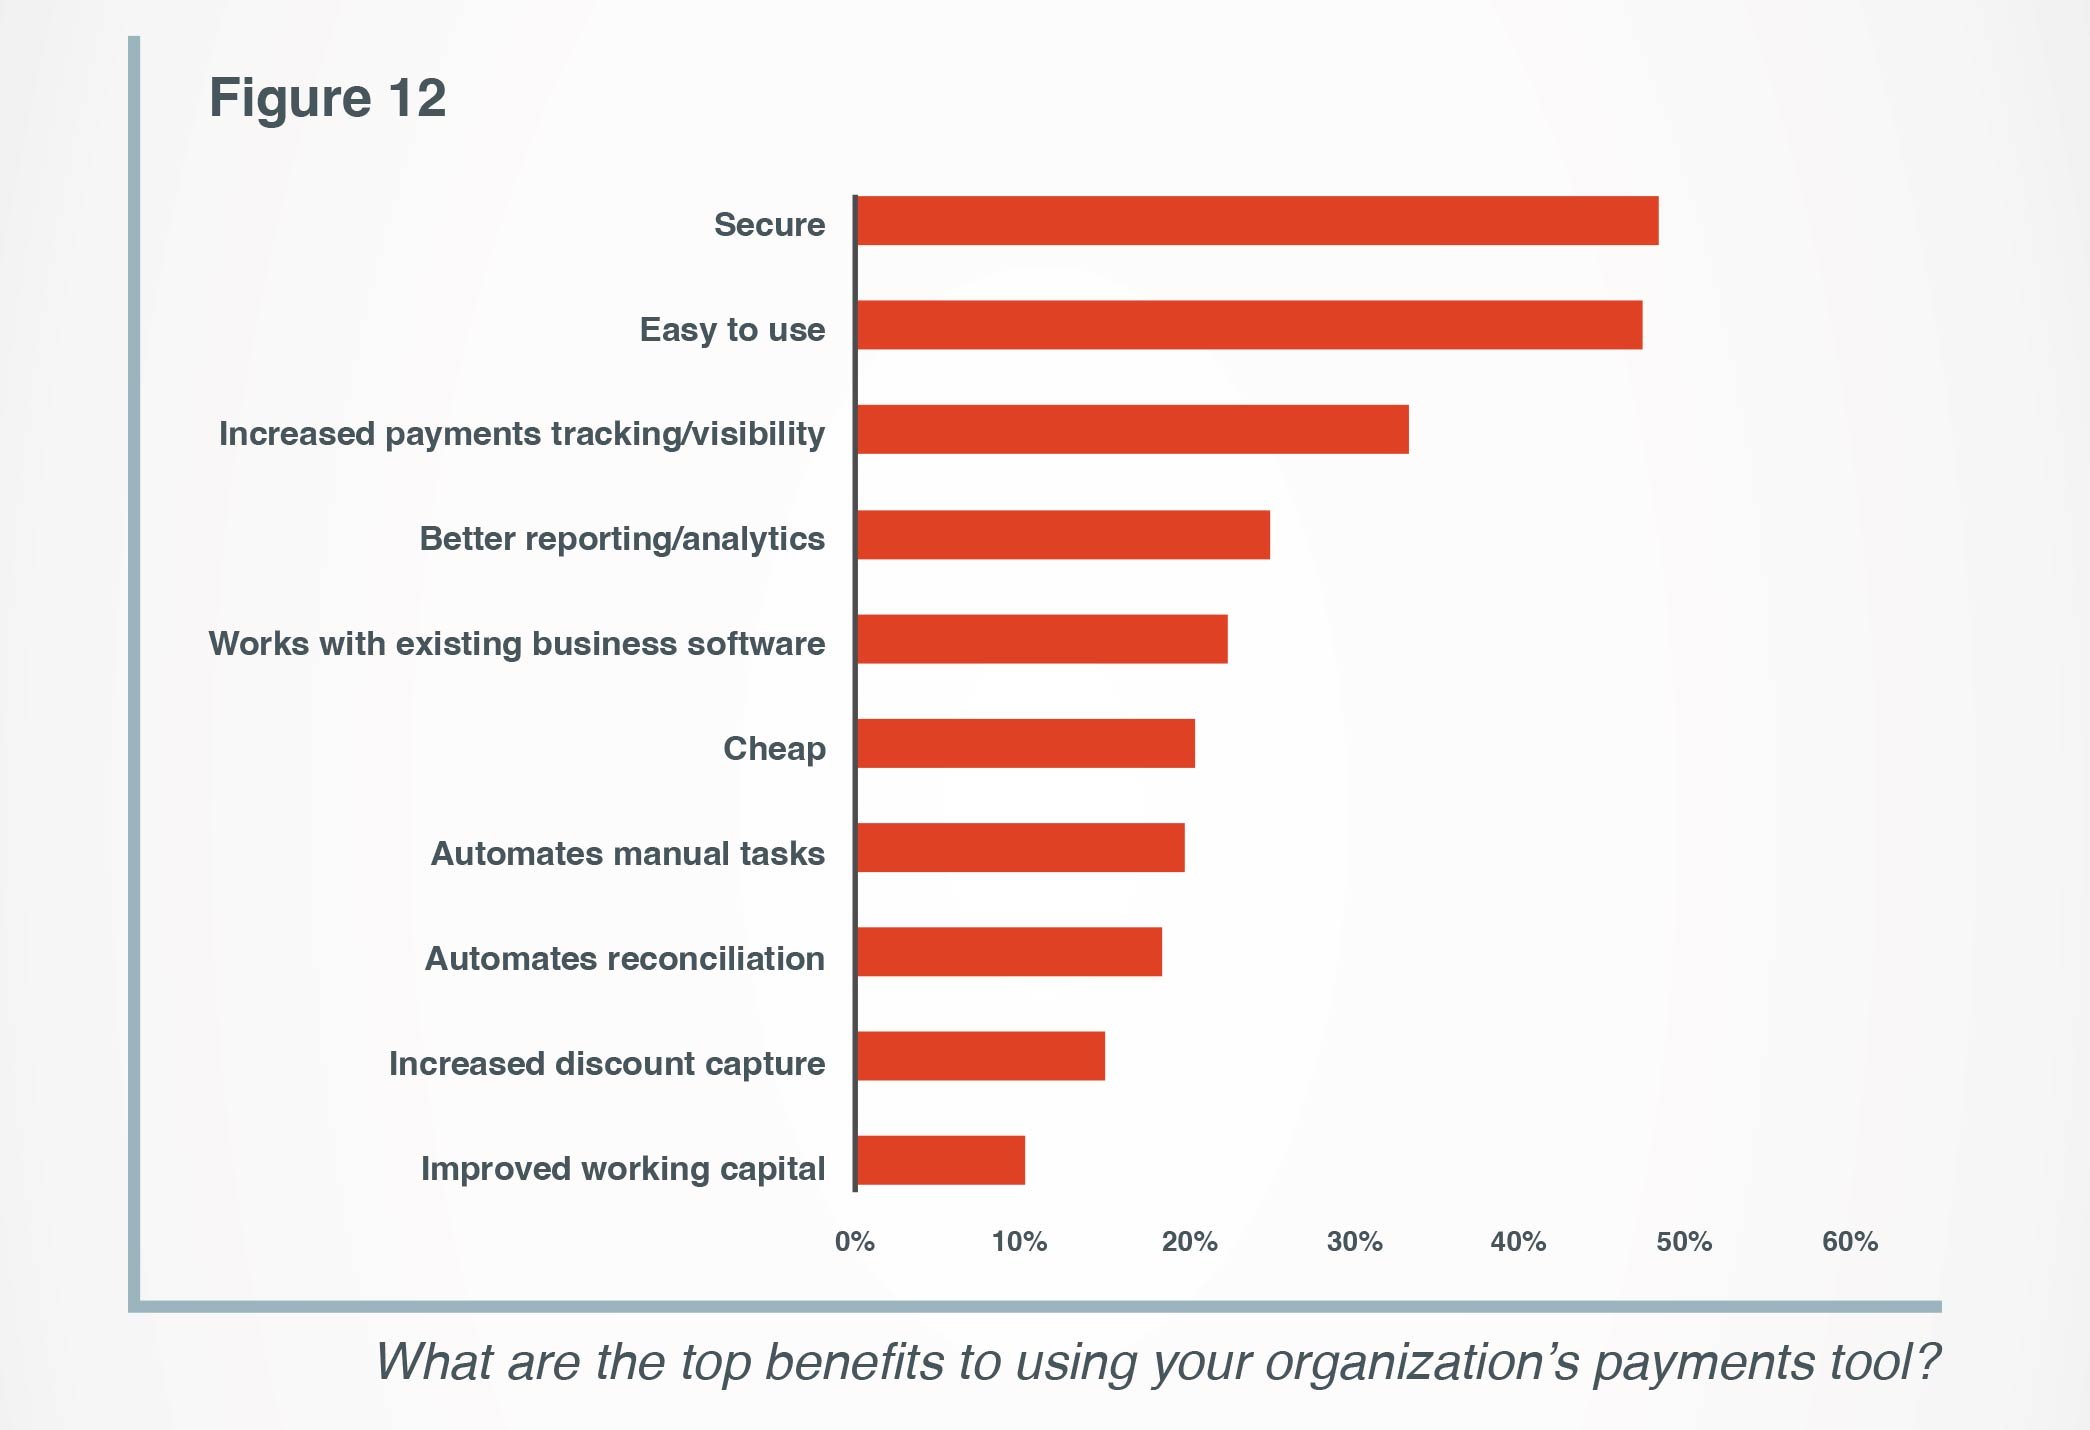 Top benefits of respondents' current payment tool